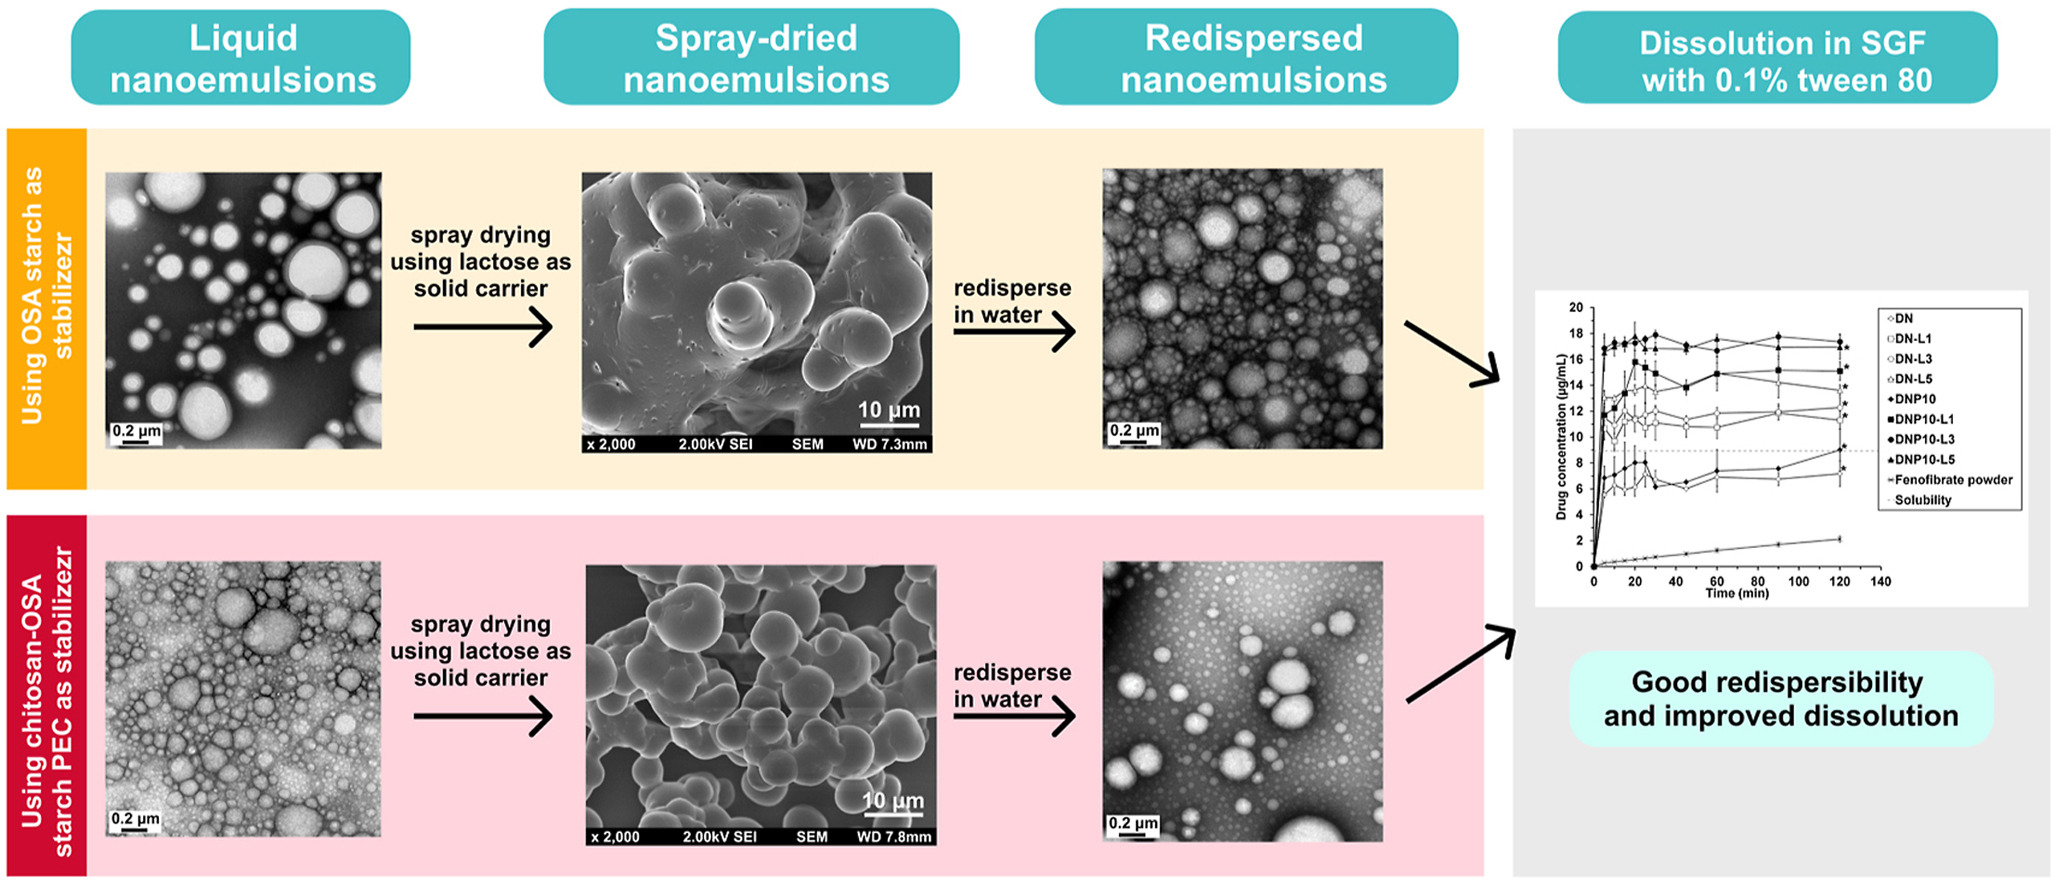 Preparation of redispersible dry nanoemulsion using chitosan-octenyl succinic anhydride starch polyelectrolyte complex as stabilizer